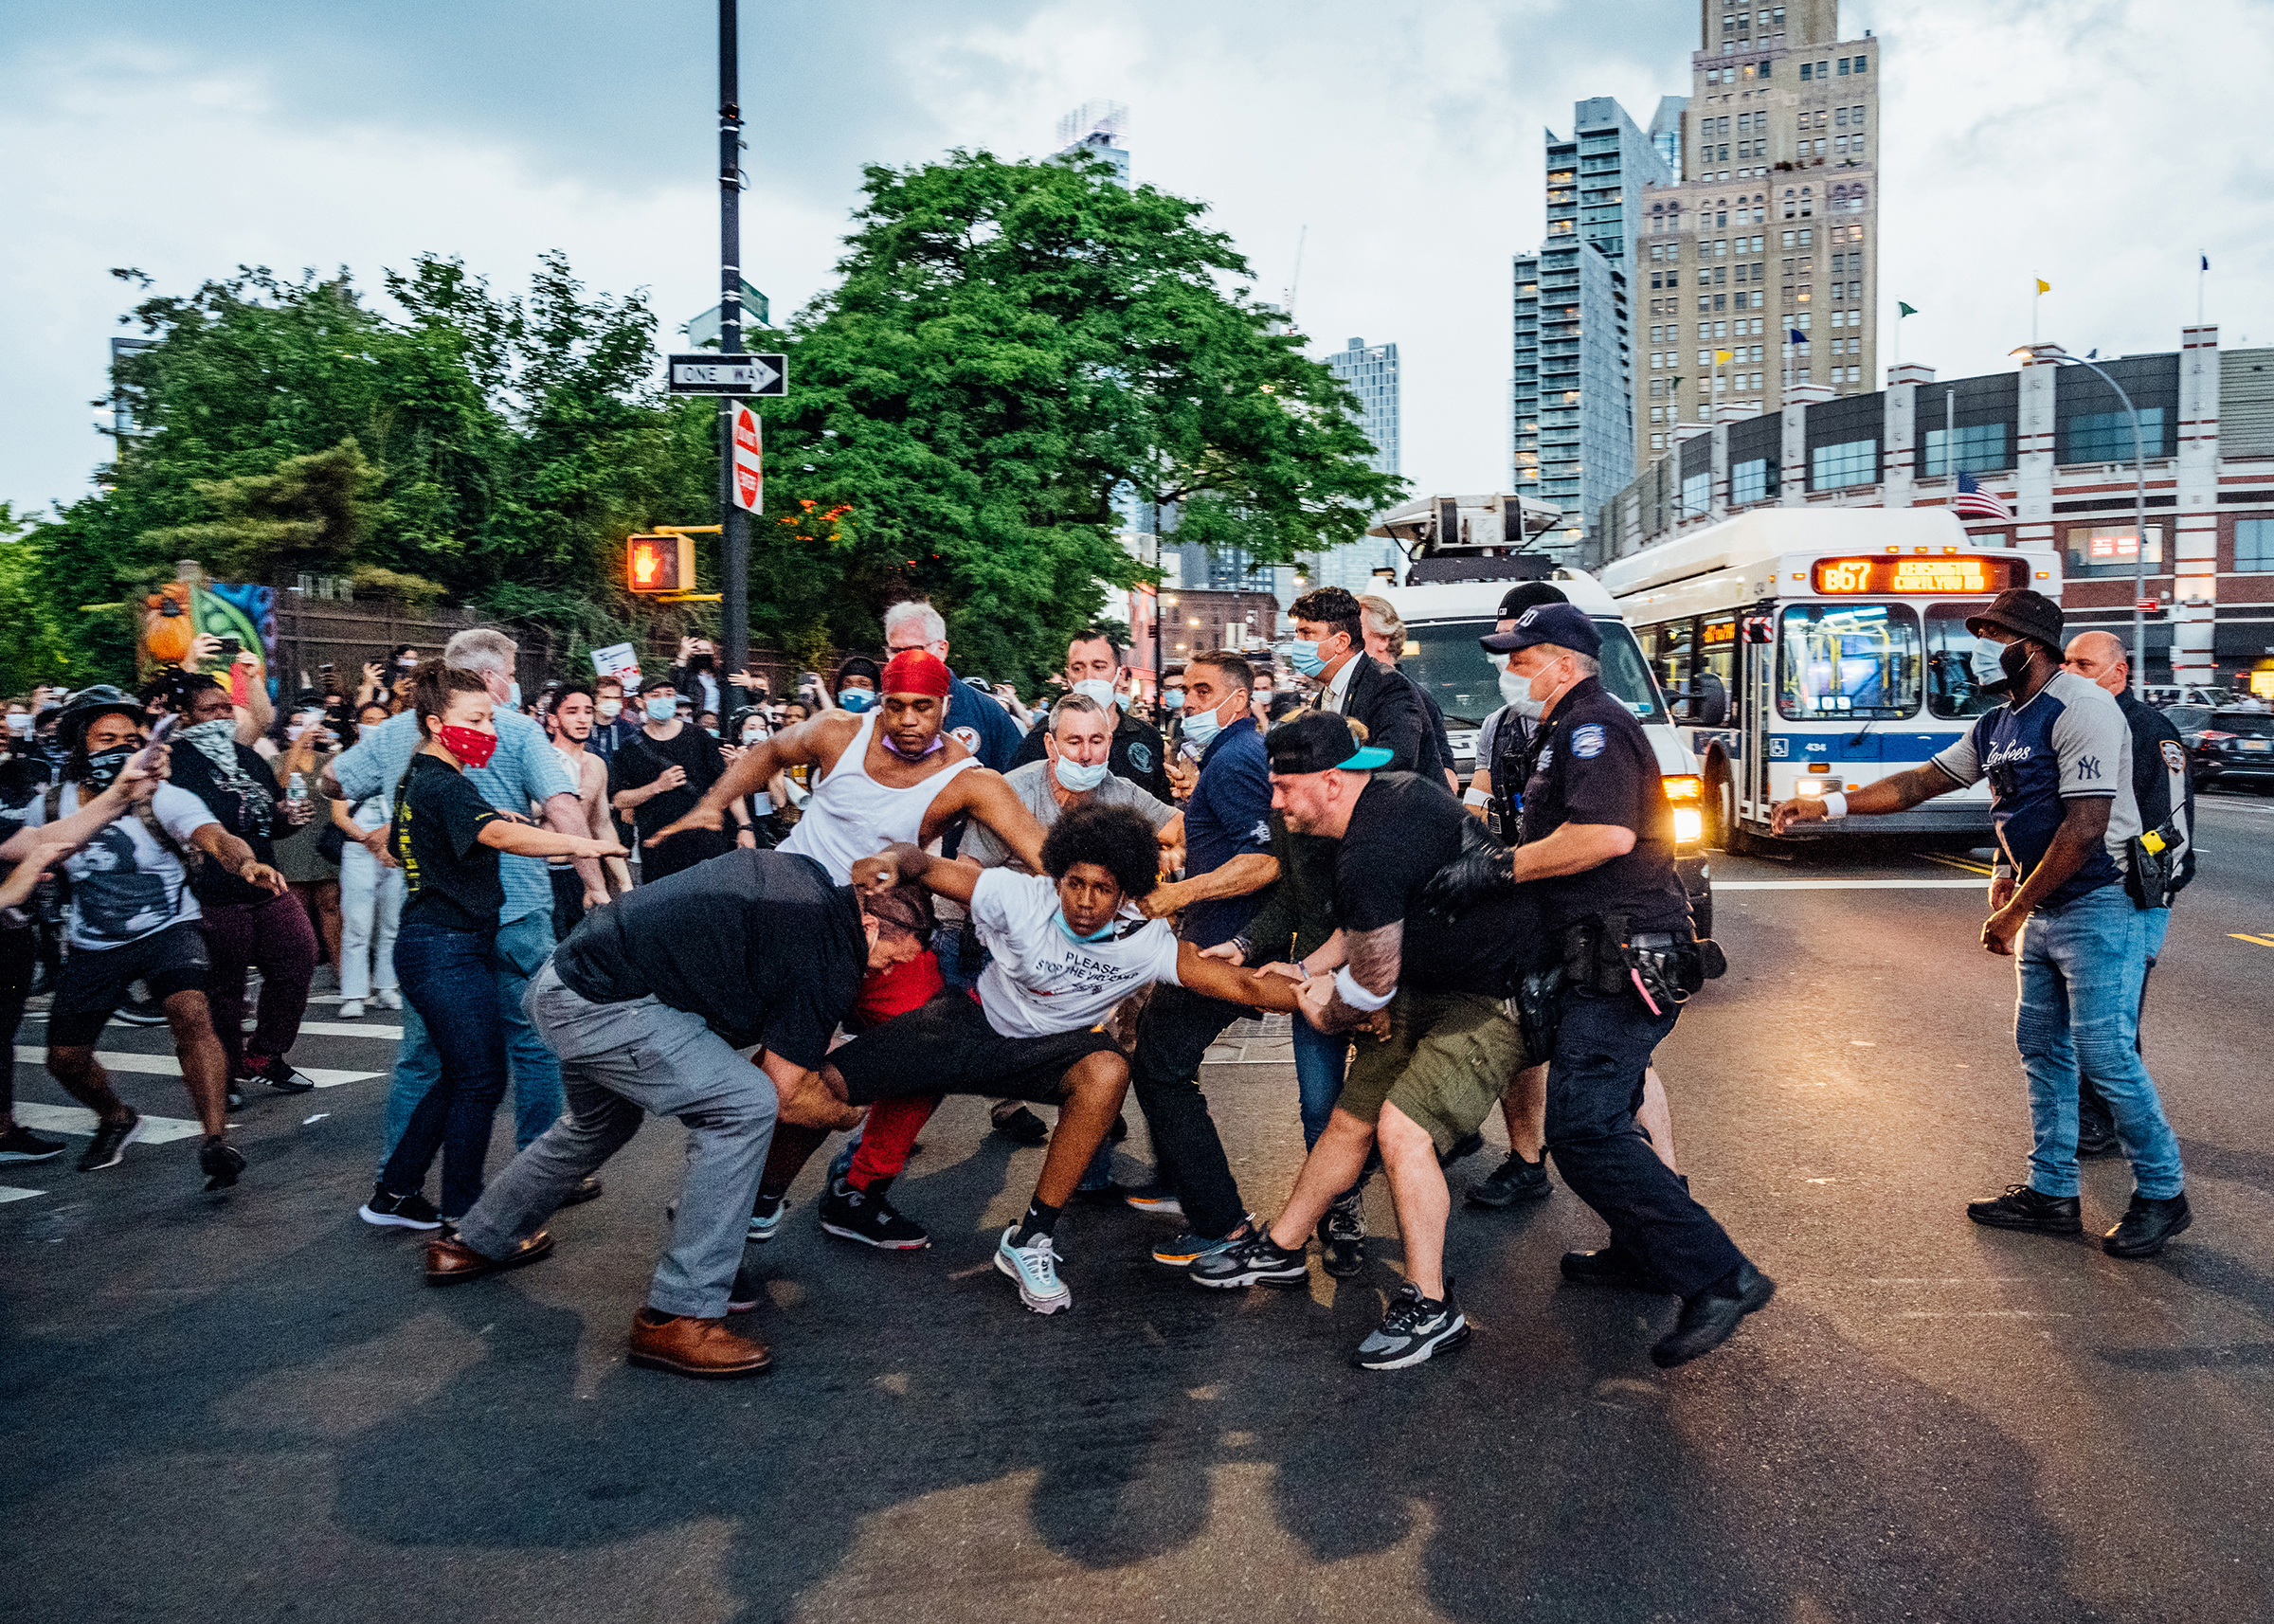 A protester, wearing a shirt that reads "Please Stop the Violence," is dragged near Brooklyn's Barclays Center on May 29, four days after George Floyd's death.